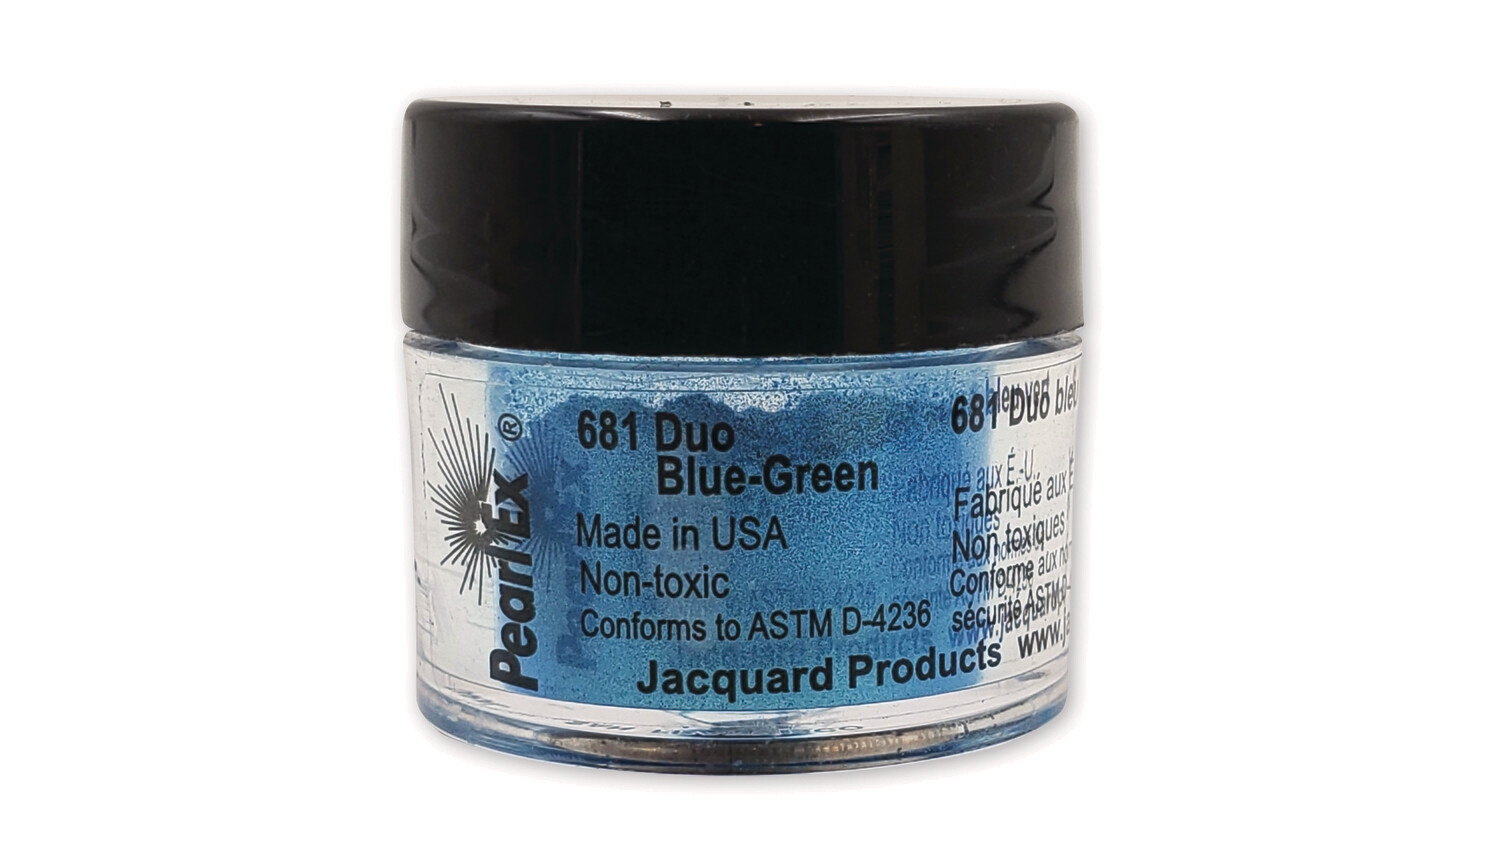 Pearl Ex Powdered Pigments, 3 gram-Duo blue-green